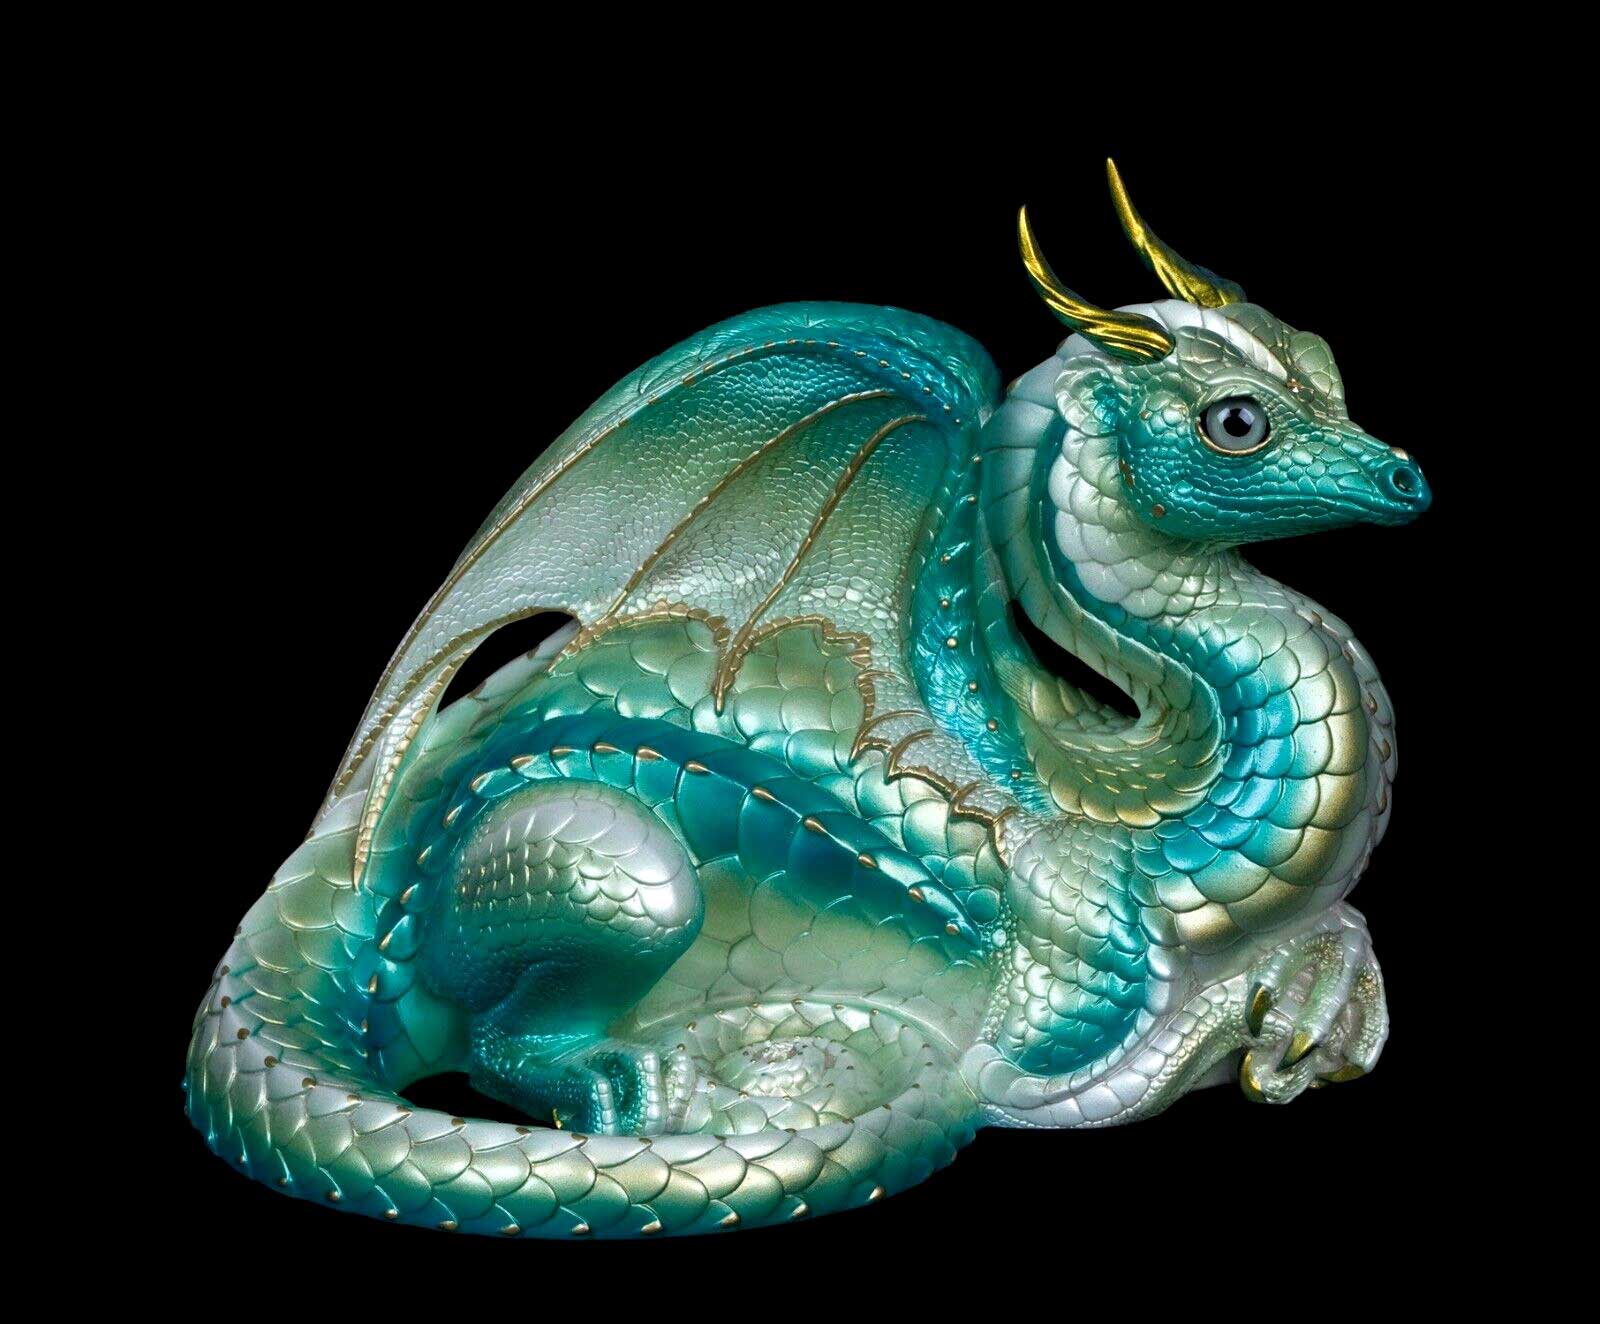 20230310-Seaglass-Lap-Dragon-Test-Paint-1-by-Gina